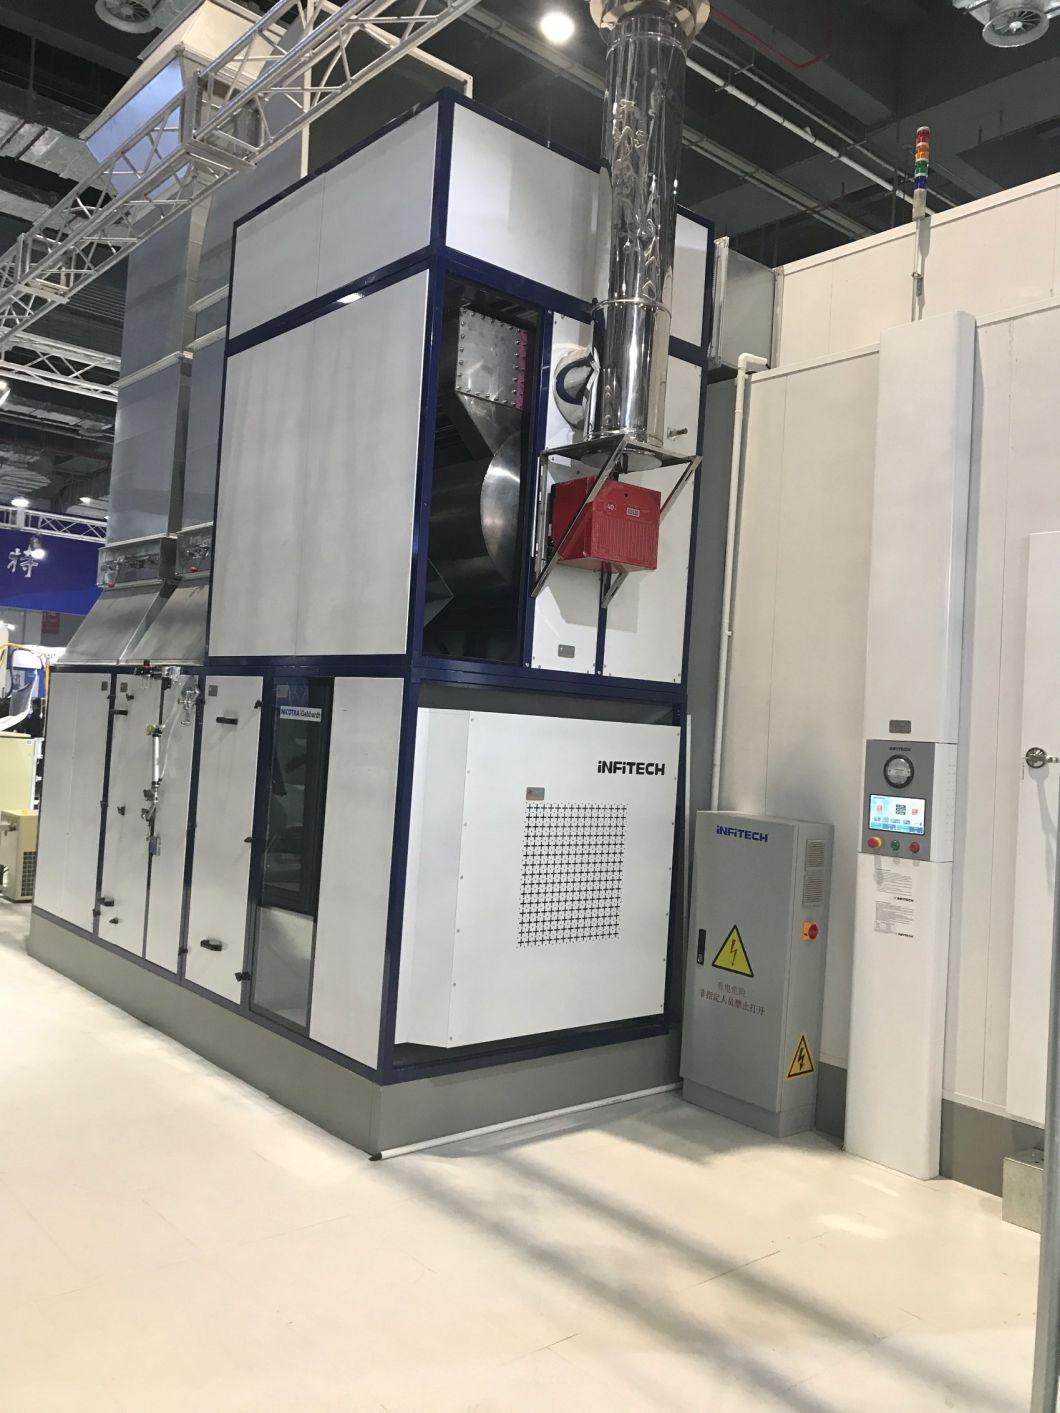 Full Downdraft Paint Booth for Heavy Duty Products From Infitech